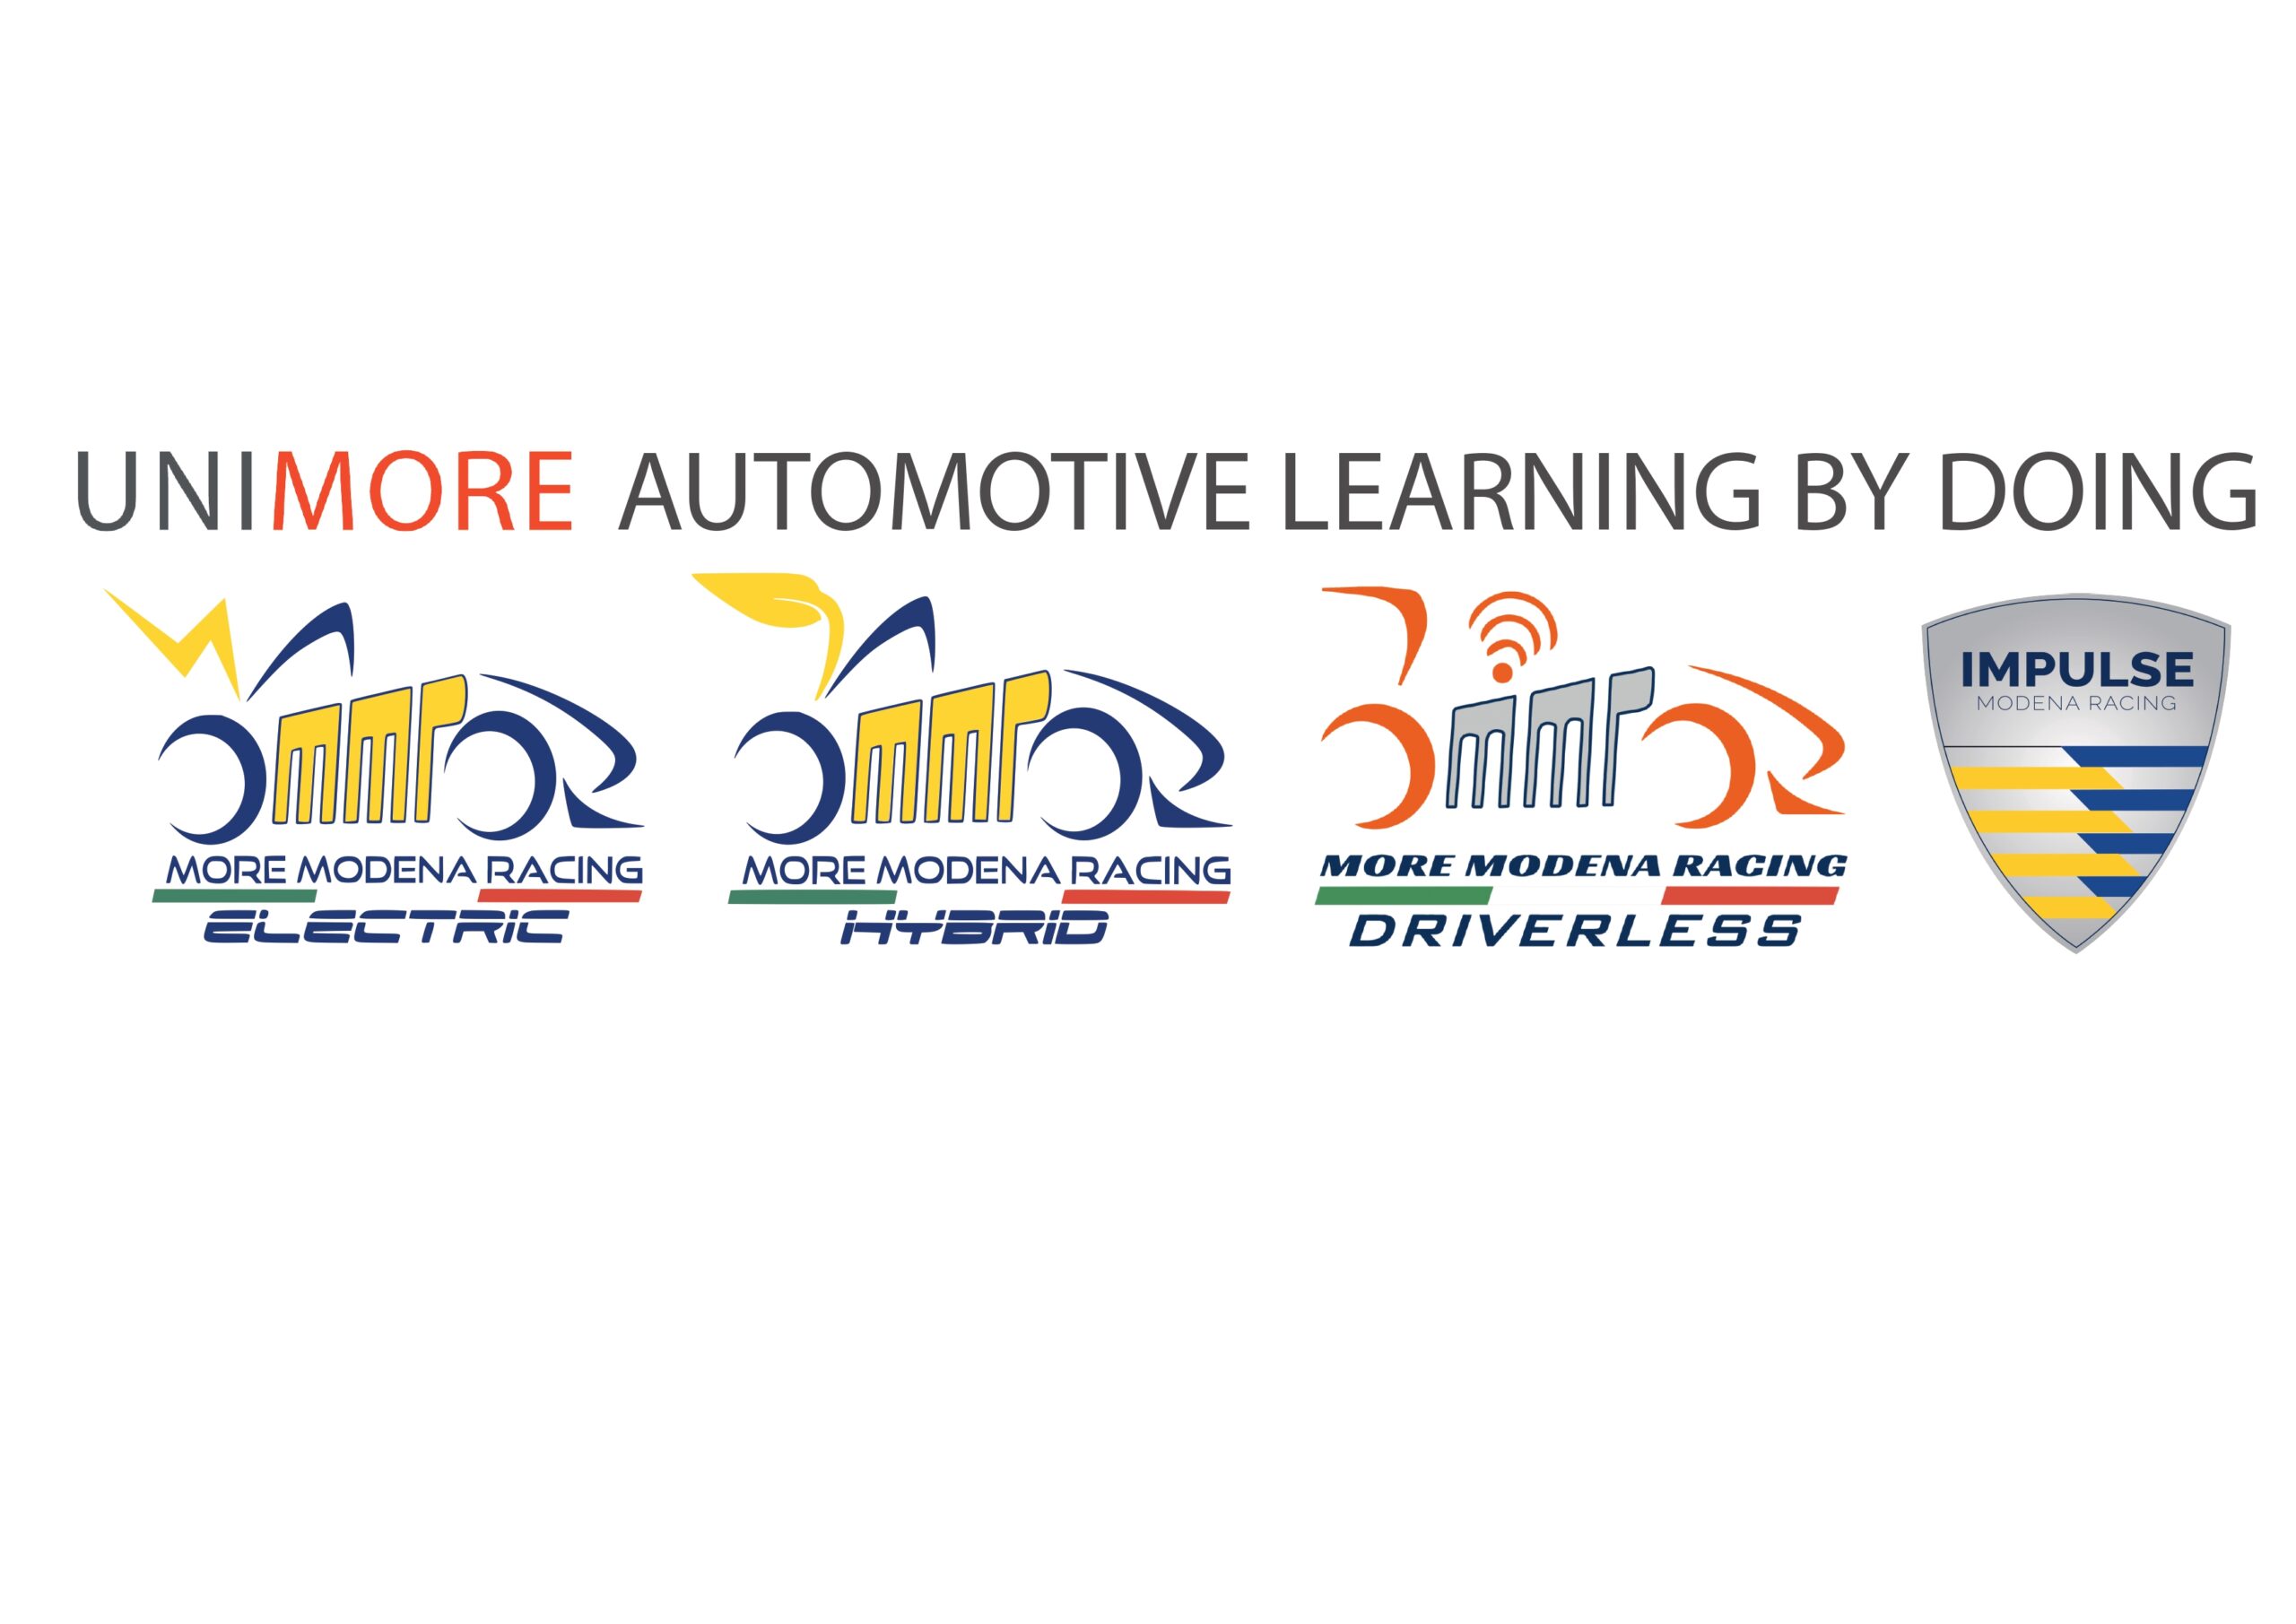 UNIMORE Automotive Learning By Doing